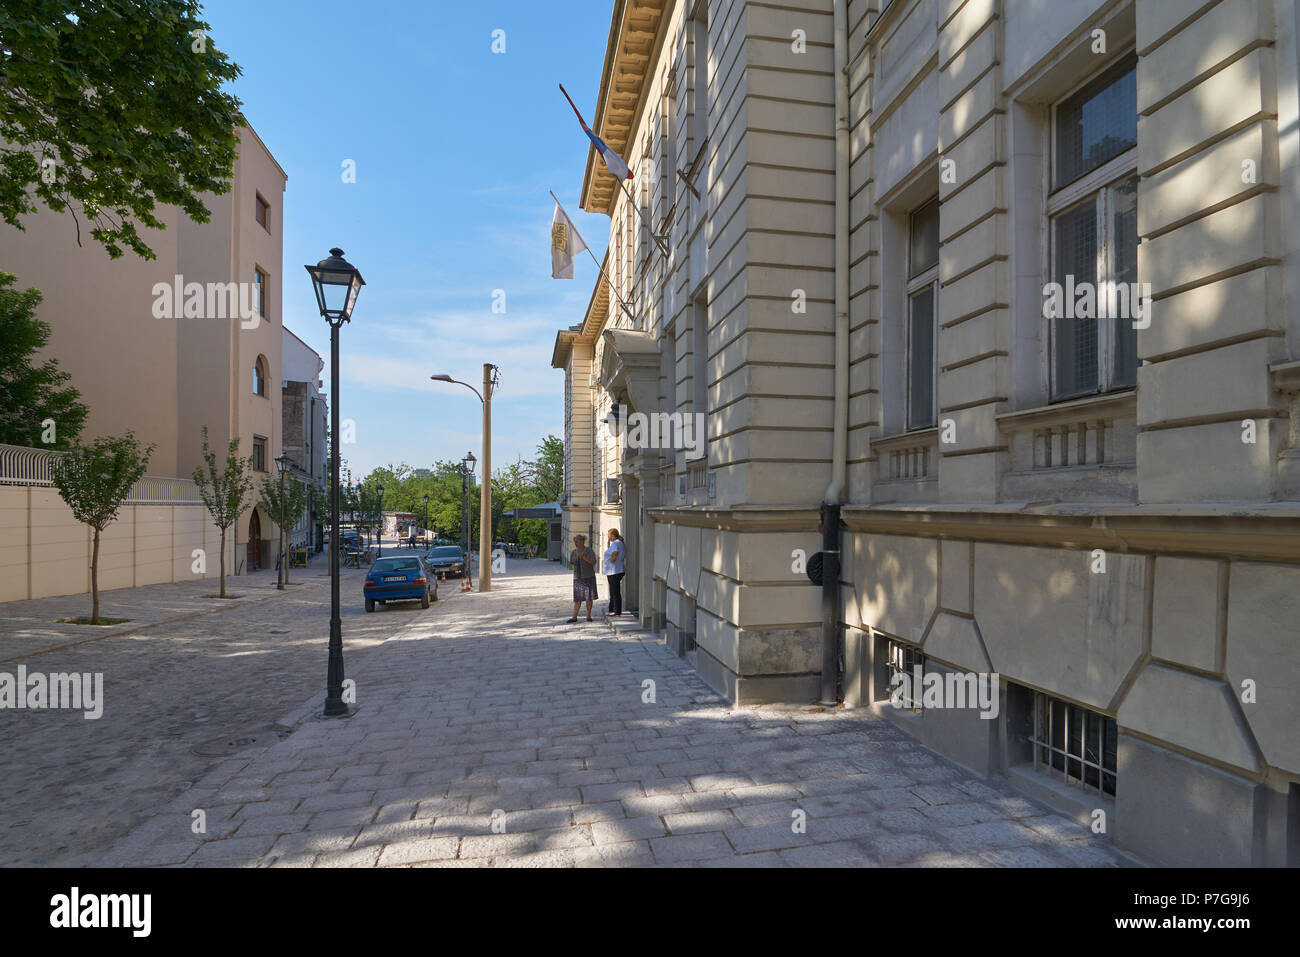 Belgrade, Serbia - May 03, 2018: Morning view on Kosancicev venac street with beautiful old houses on it. Two middle aged women smoking outdoors. Stock Photo